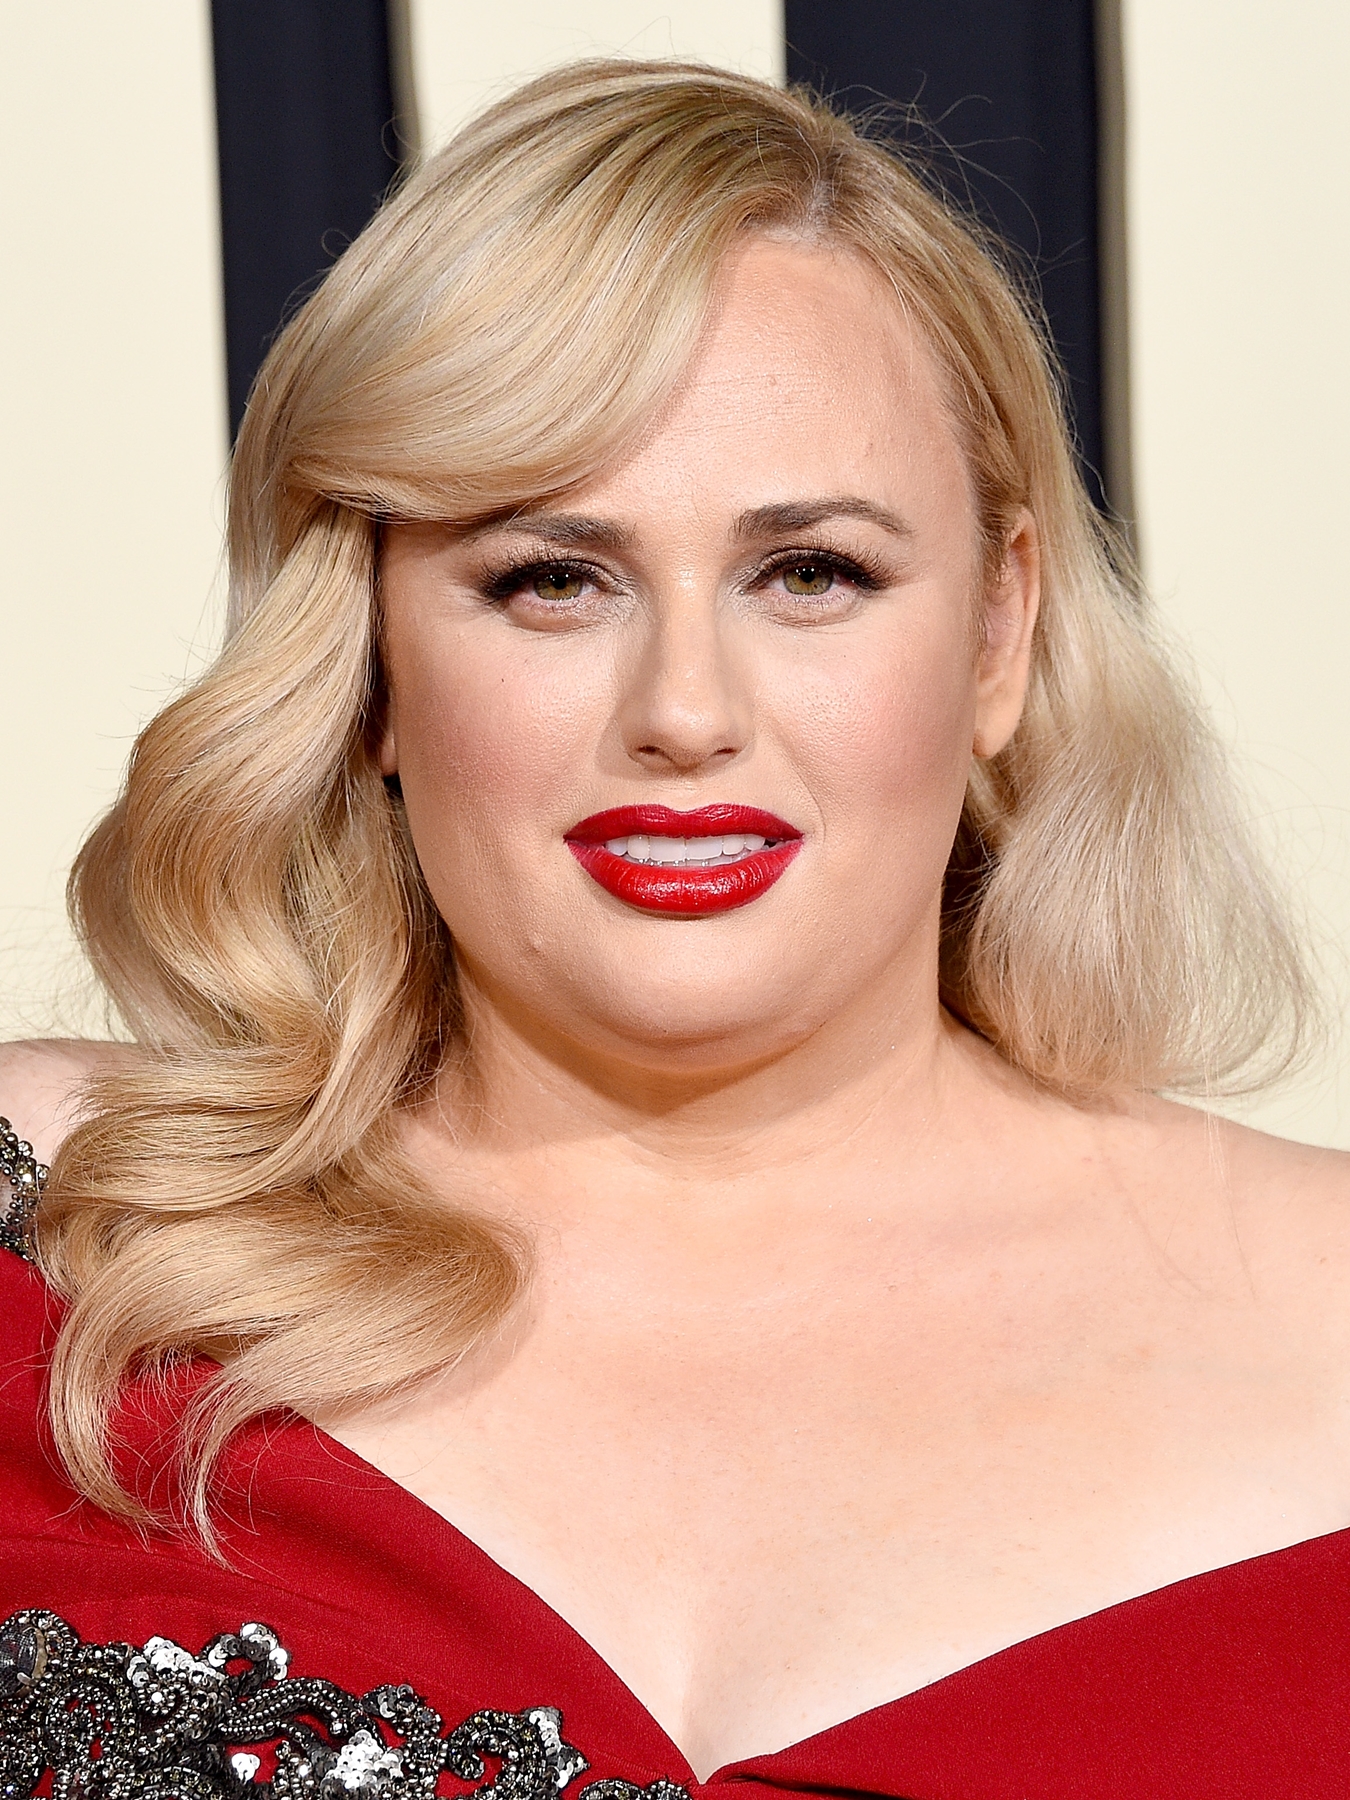 Rebel Wilson - Rebel Wilson vows to appeal defamation payout in angry ...